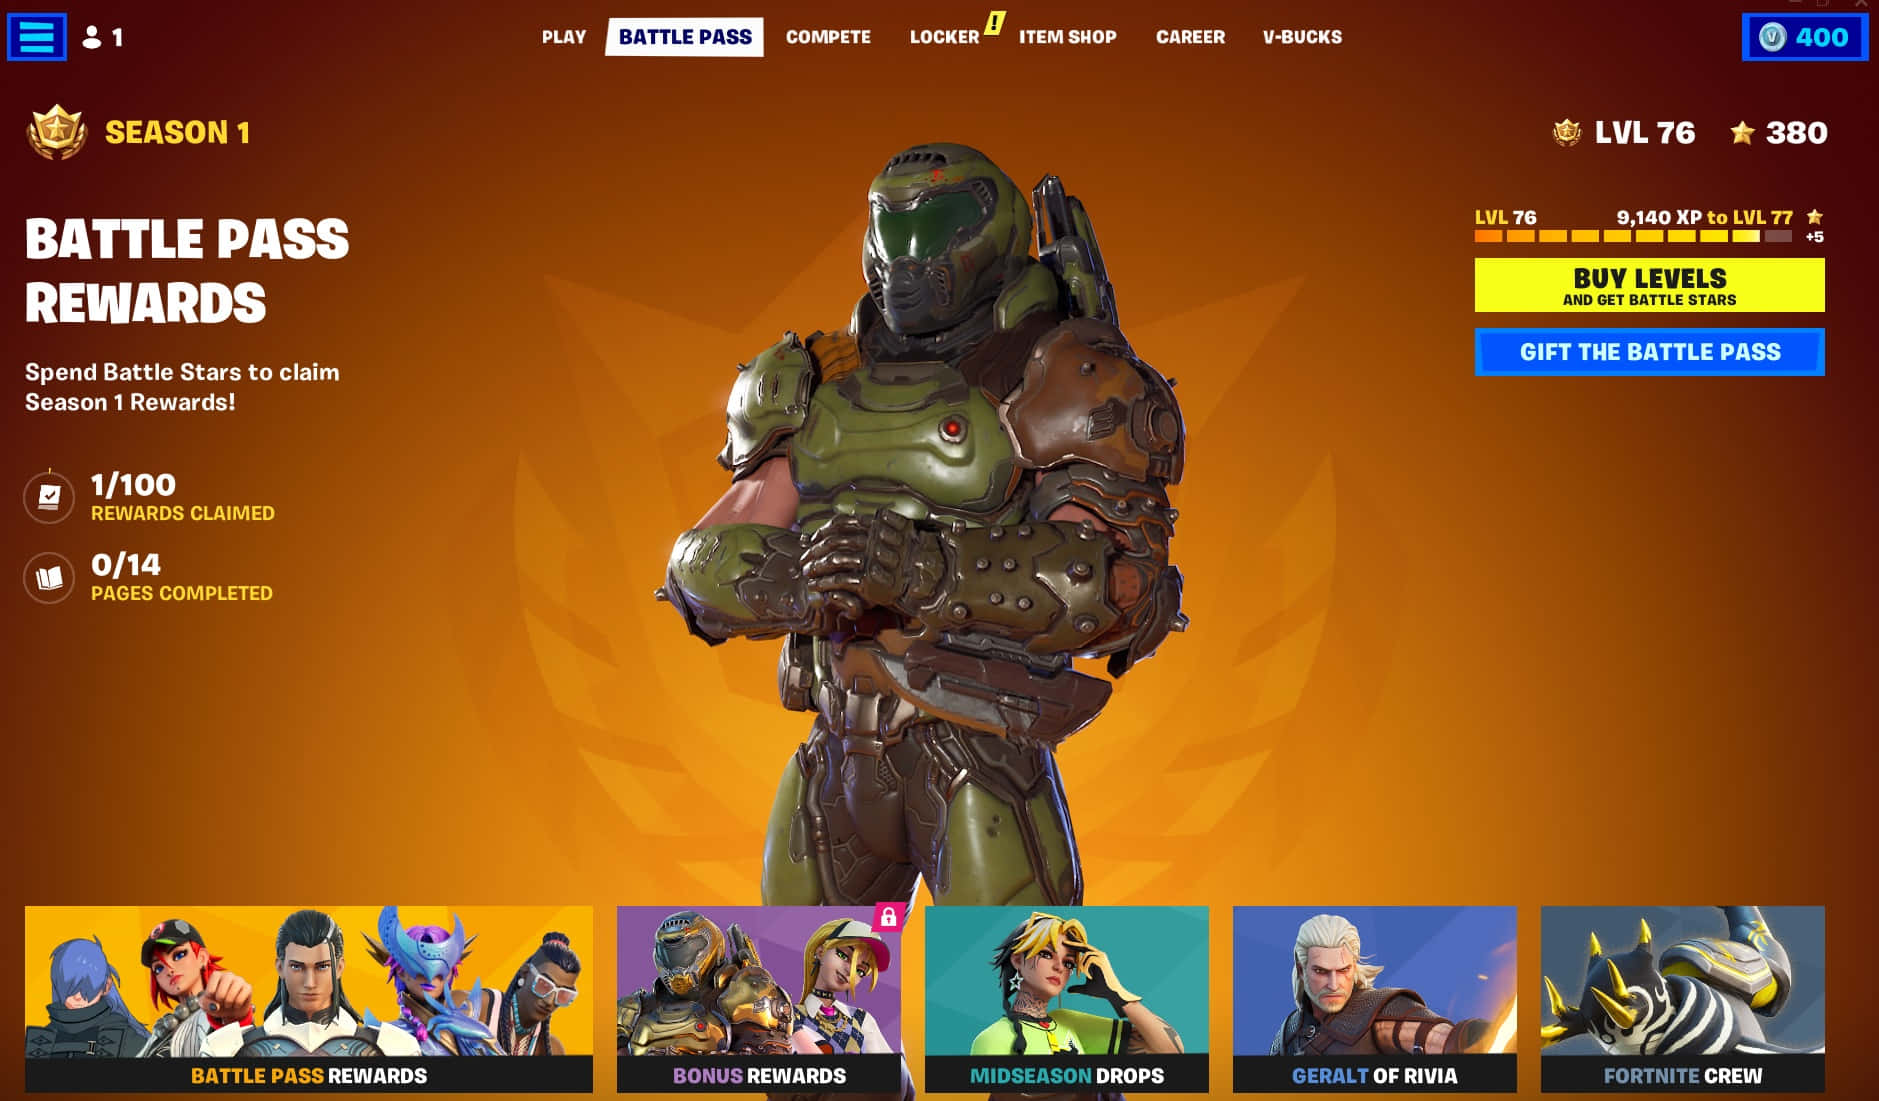 Purchase the Battle Pass and unlock new rewards every level Wallpaper